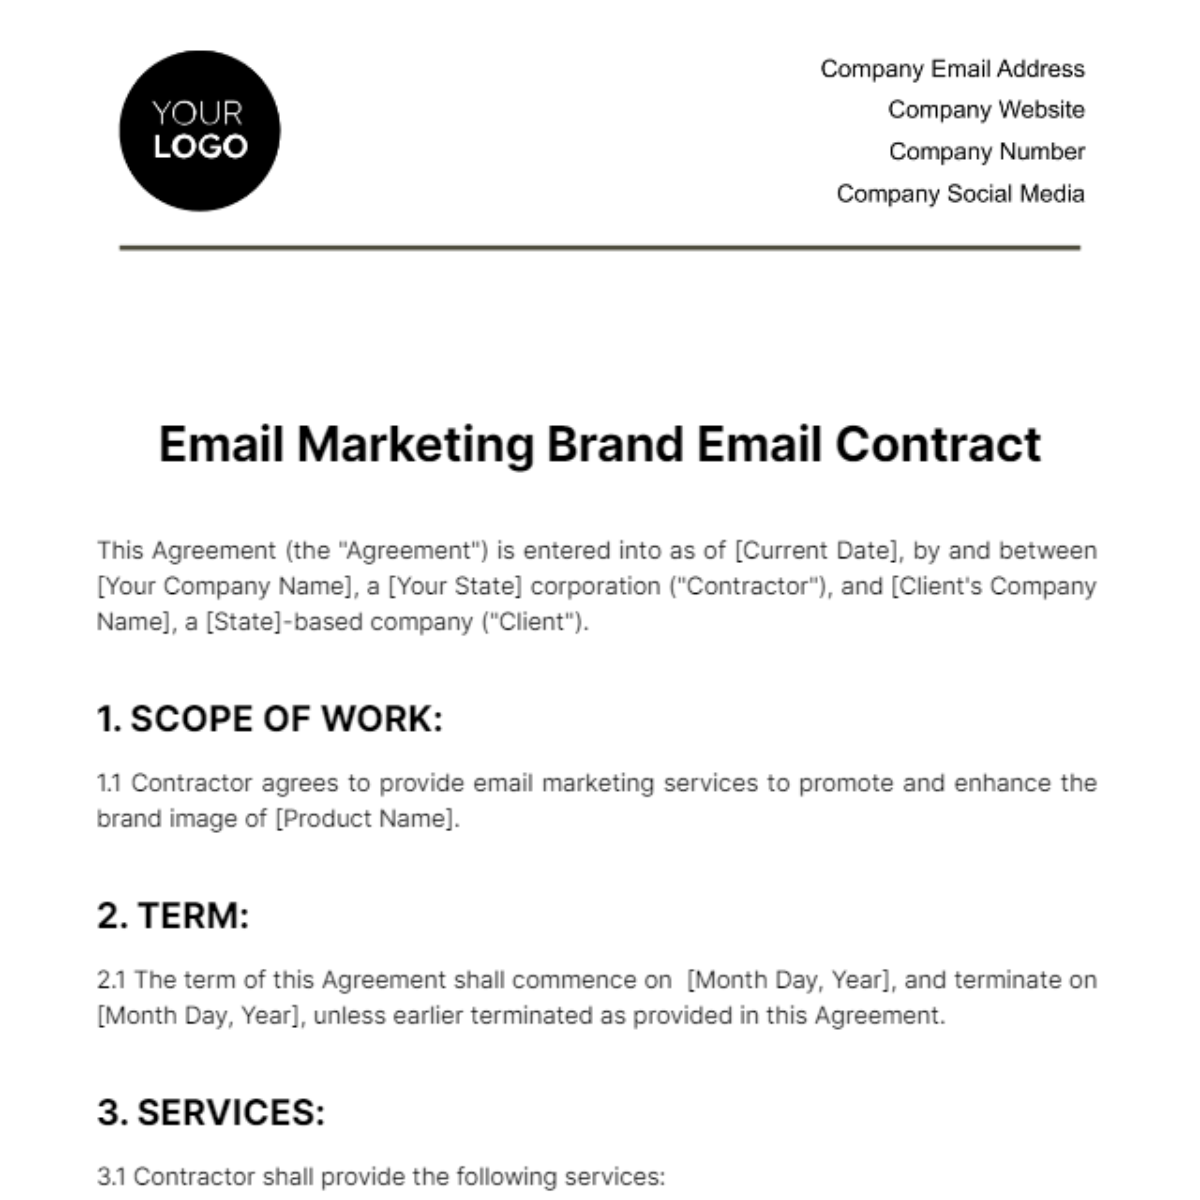 Free Email Marketing Brand Email Contract Template